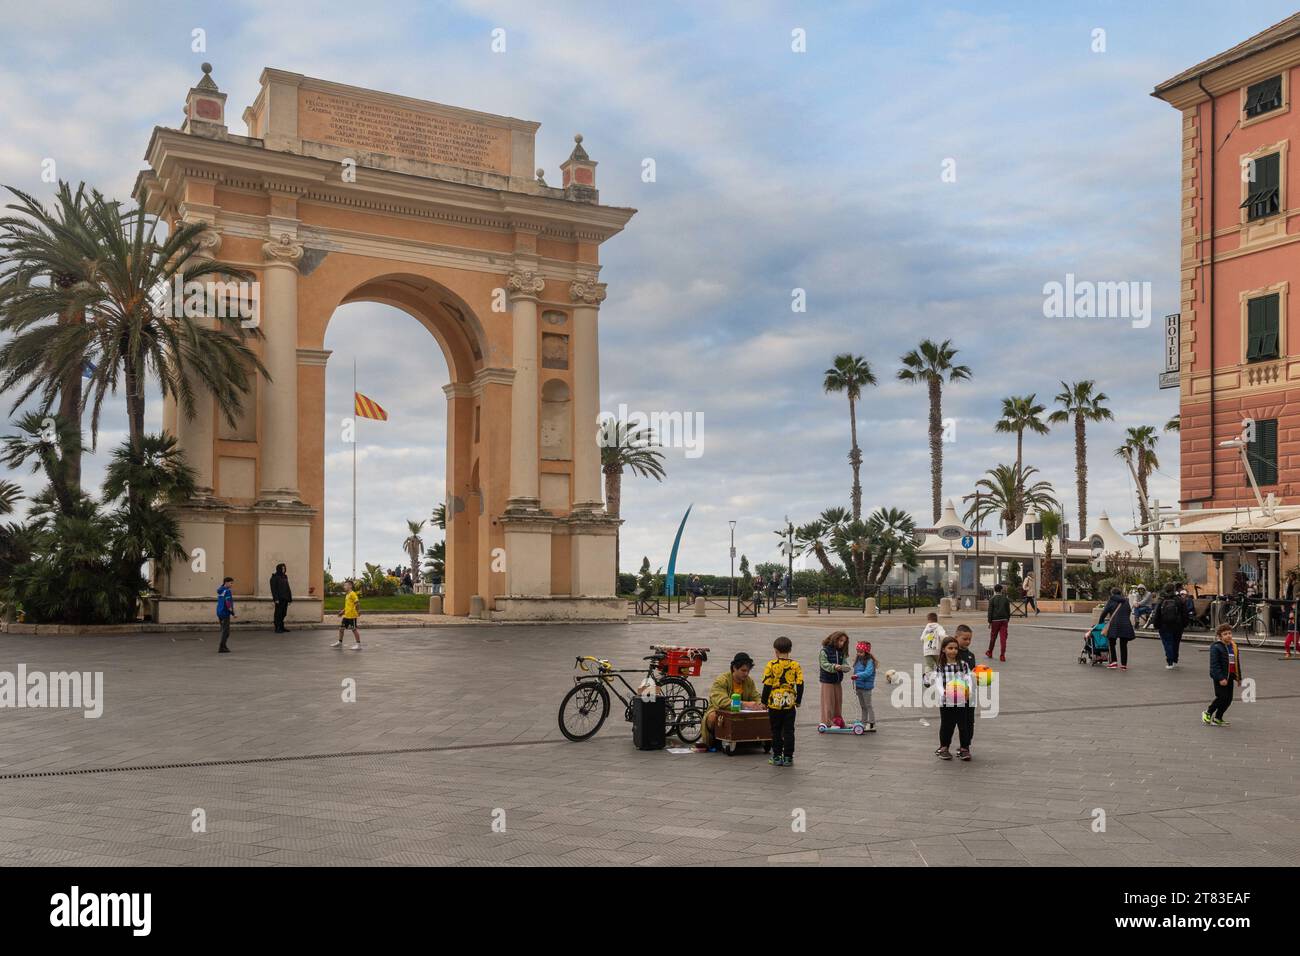 Piazza Vittorio Emanuele II with the triumphal arch to Margaret of Spain (1666) and playing children, Finale Ligure, Savona, Liguria, Italy Stock Photo